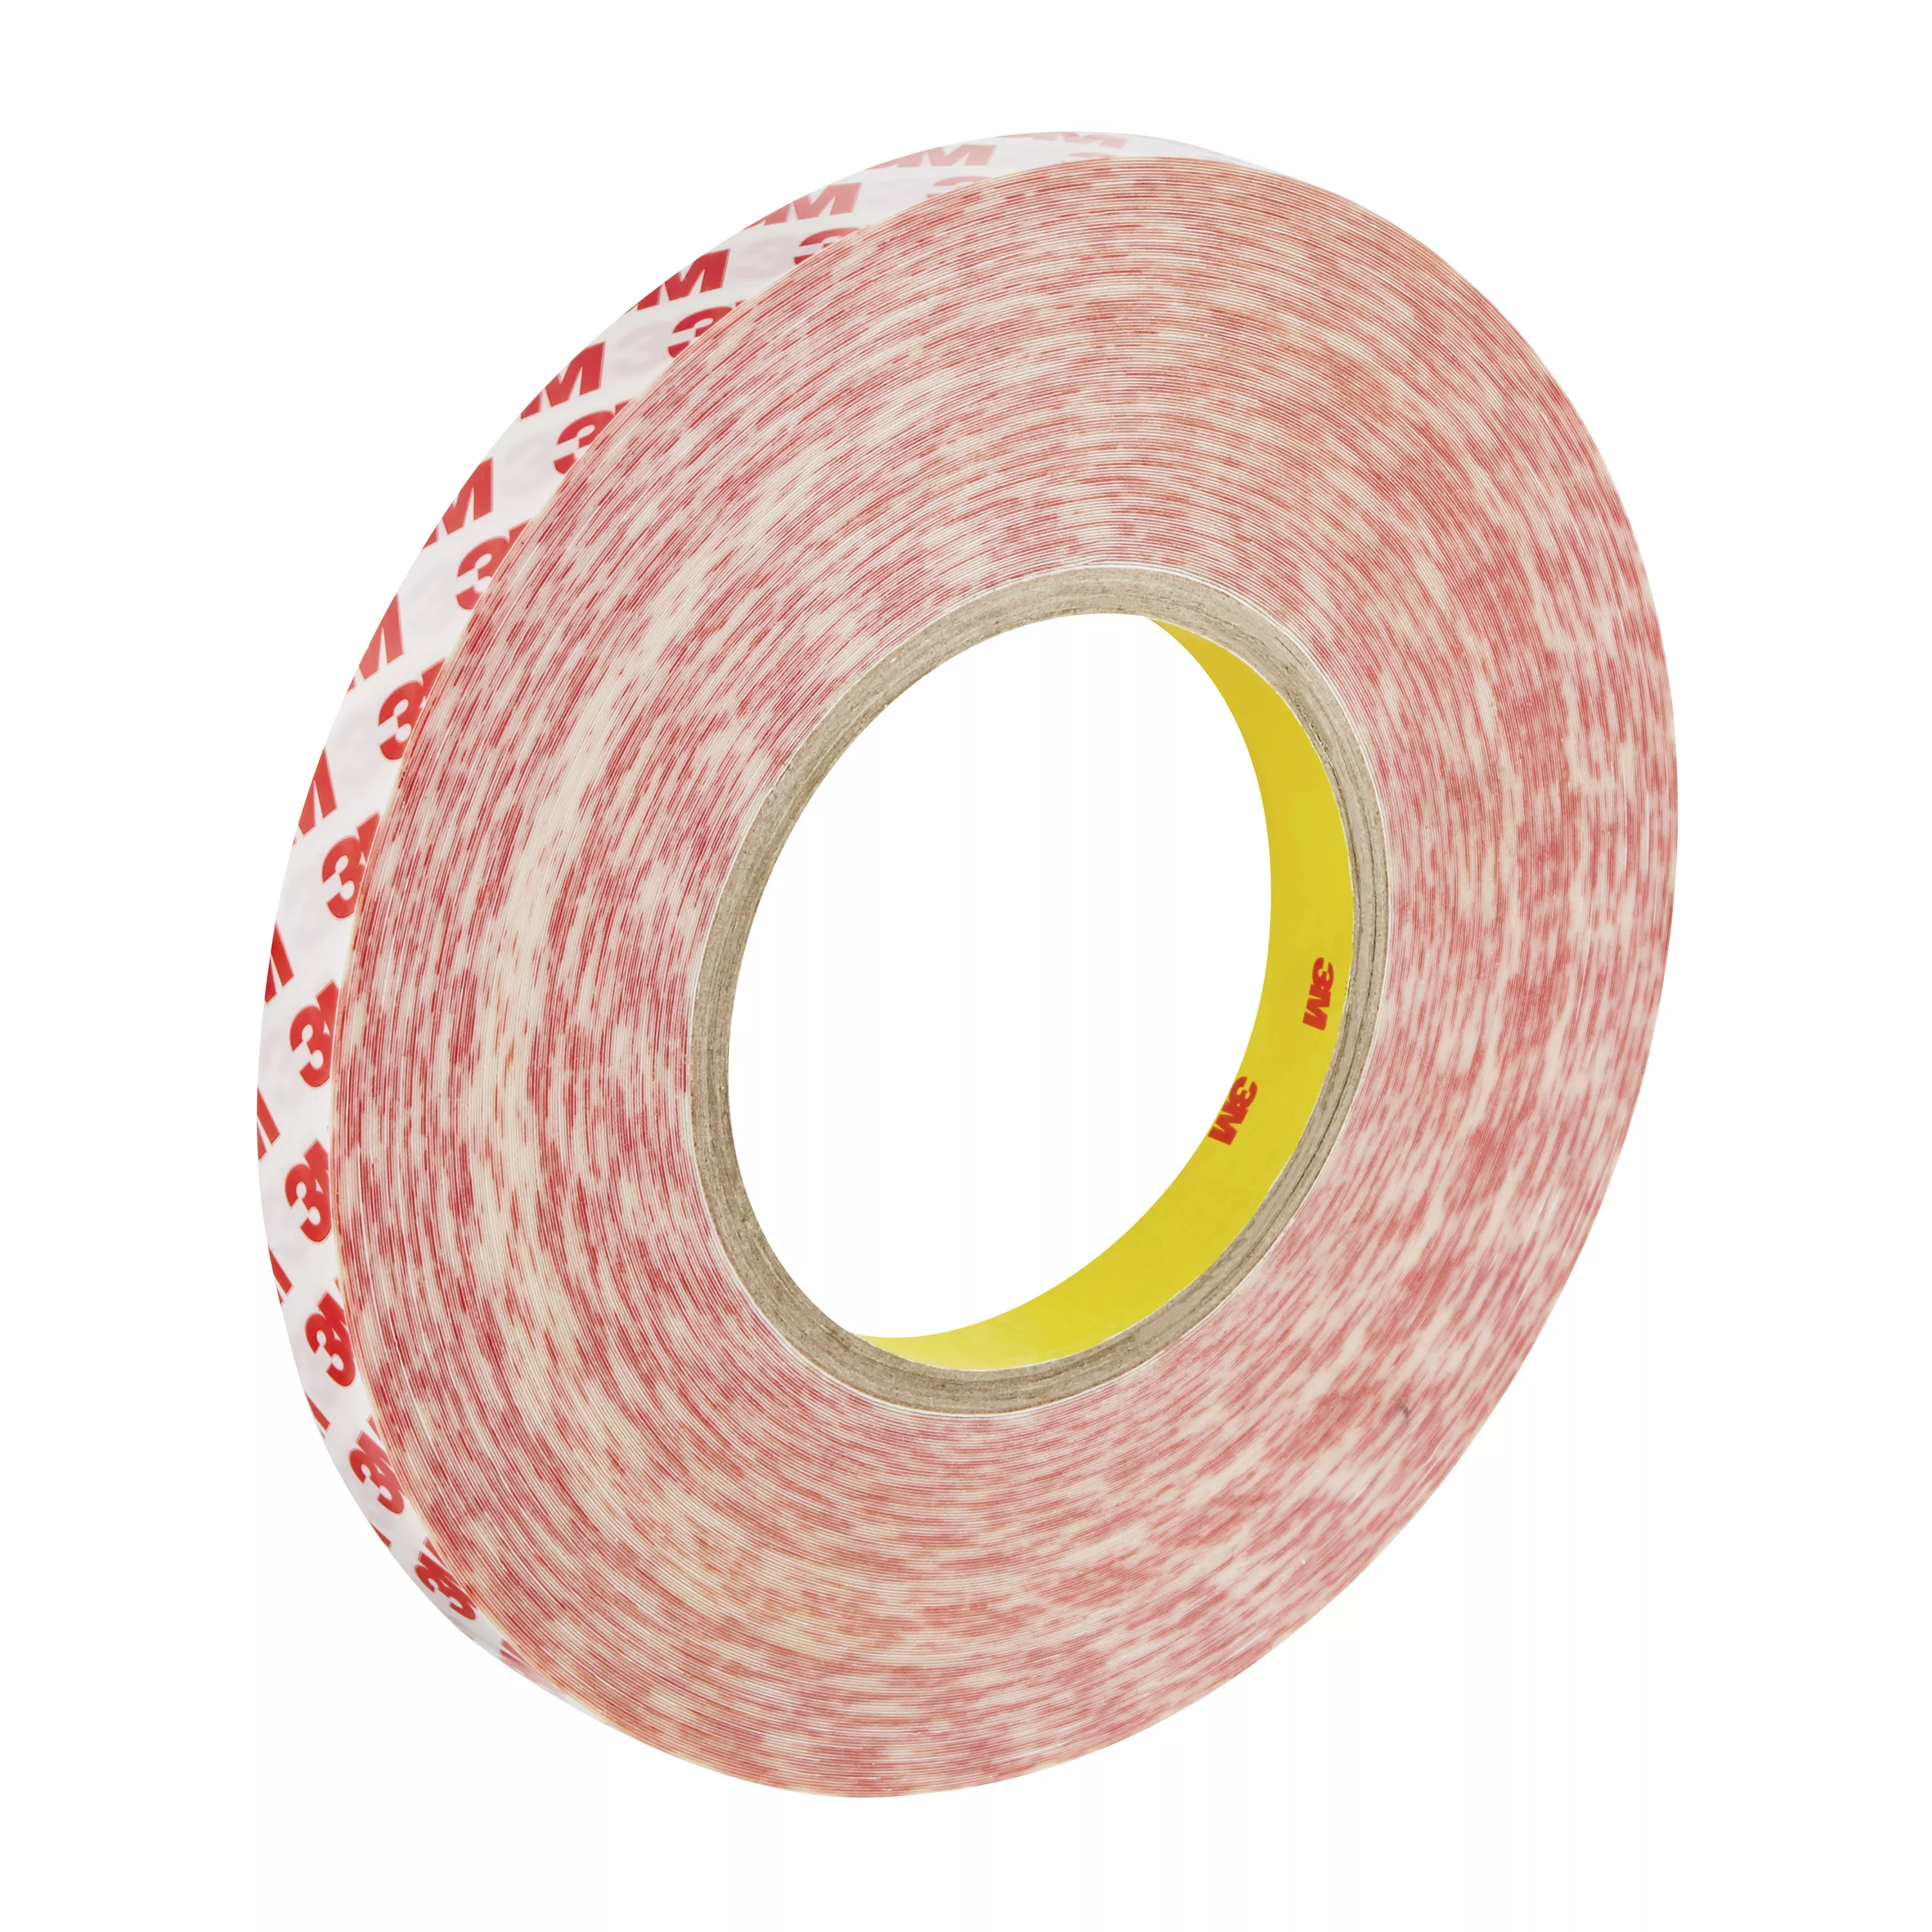 3M™ Double Coated Tape Paper Liner GPT-020, 12 mm x 50 m, 20 Roll/Case